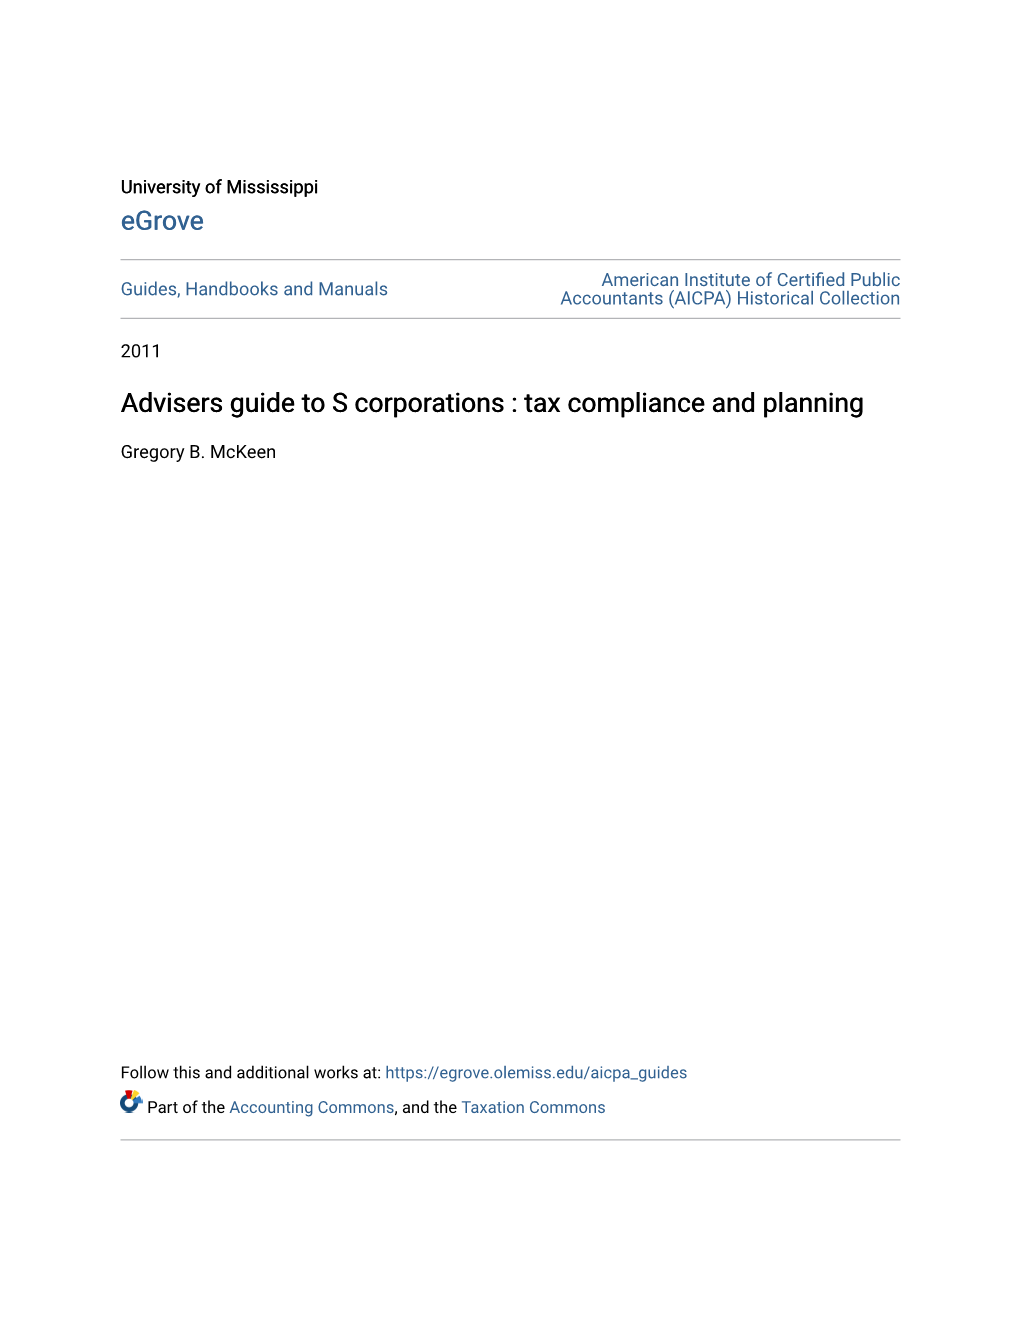 Advisers Guide to S Corporations : Tax Compliance and Planning